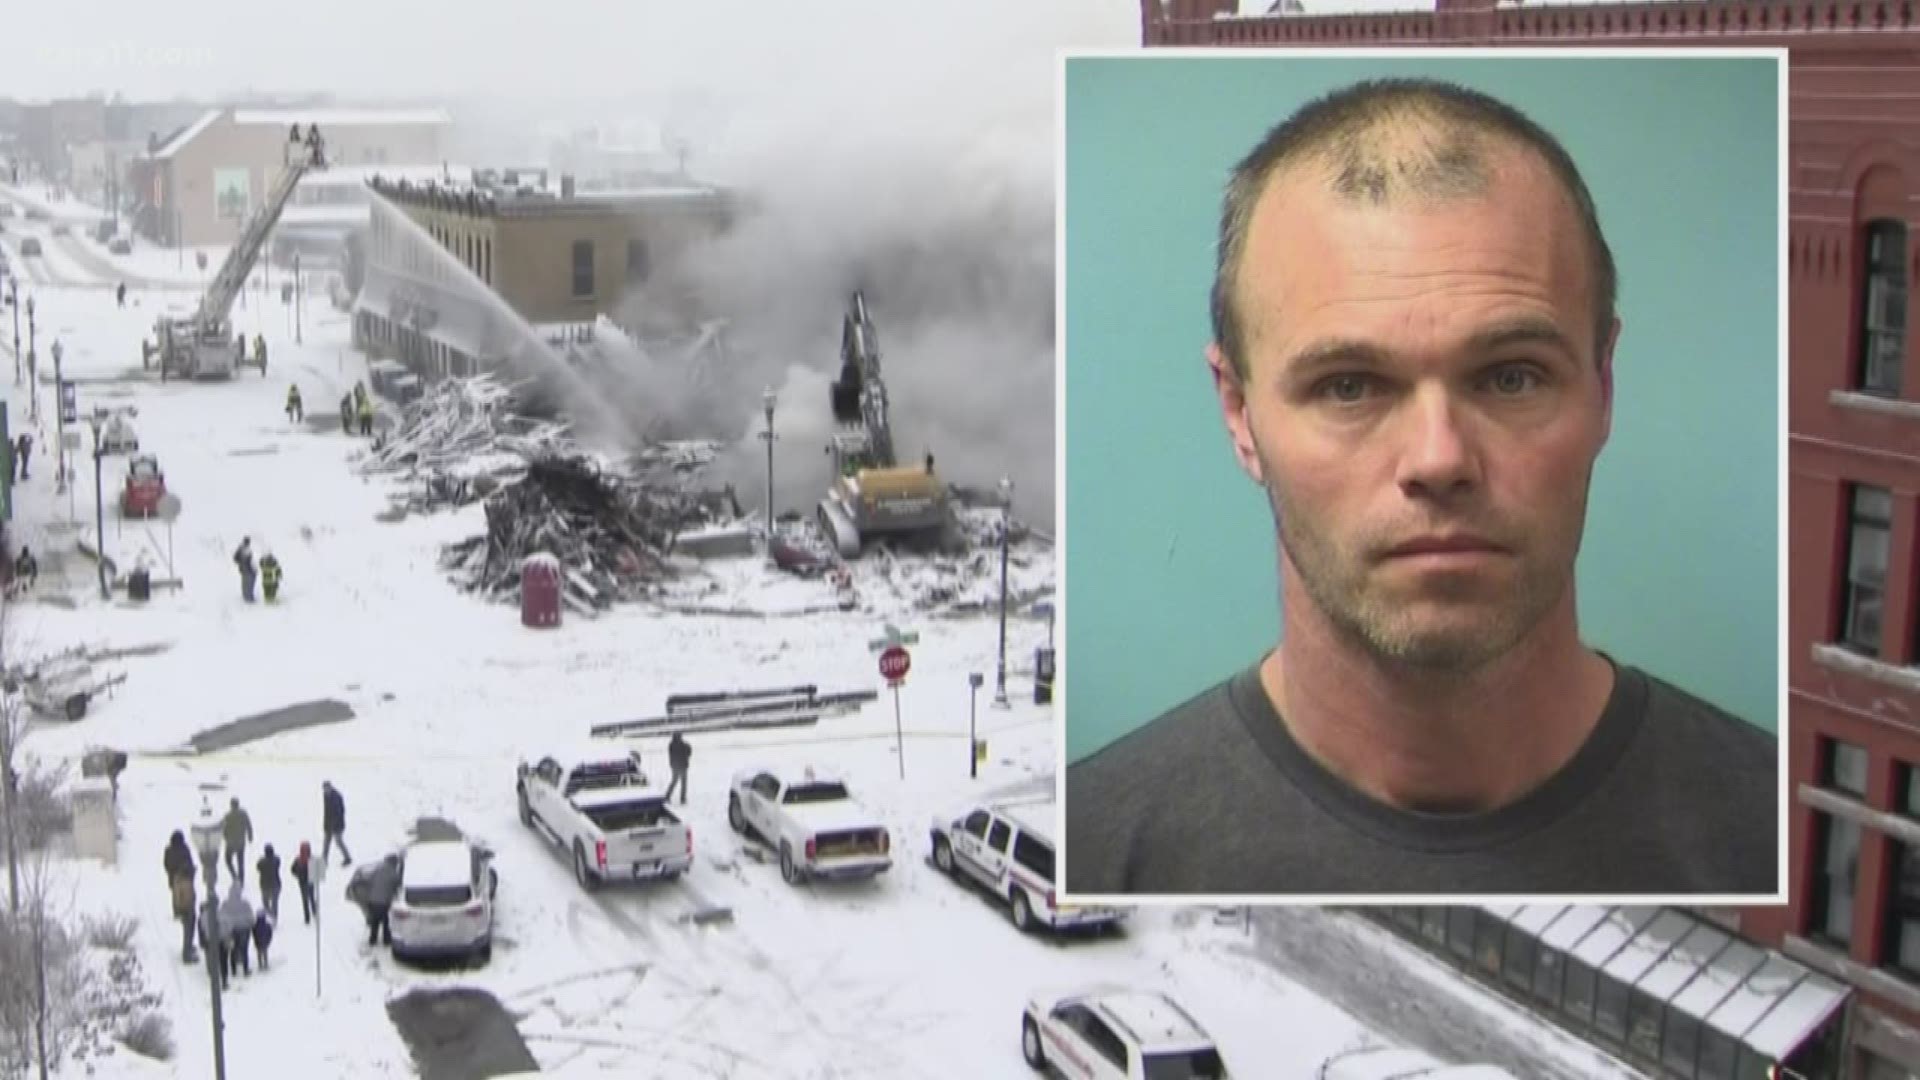 Federal investigators say Andrew Welsh used an accelerant to start his desk on fire, and the flames then spread to destroy the historic building.